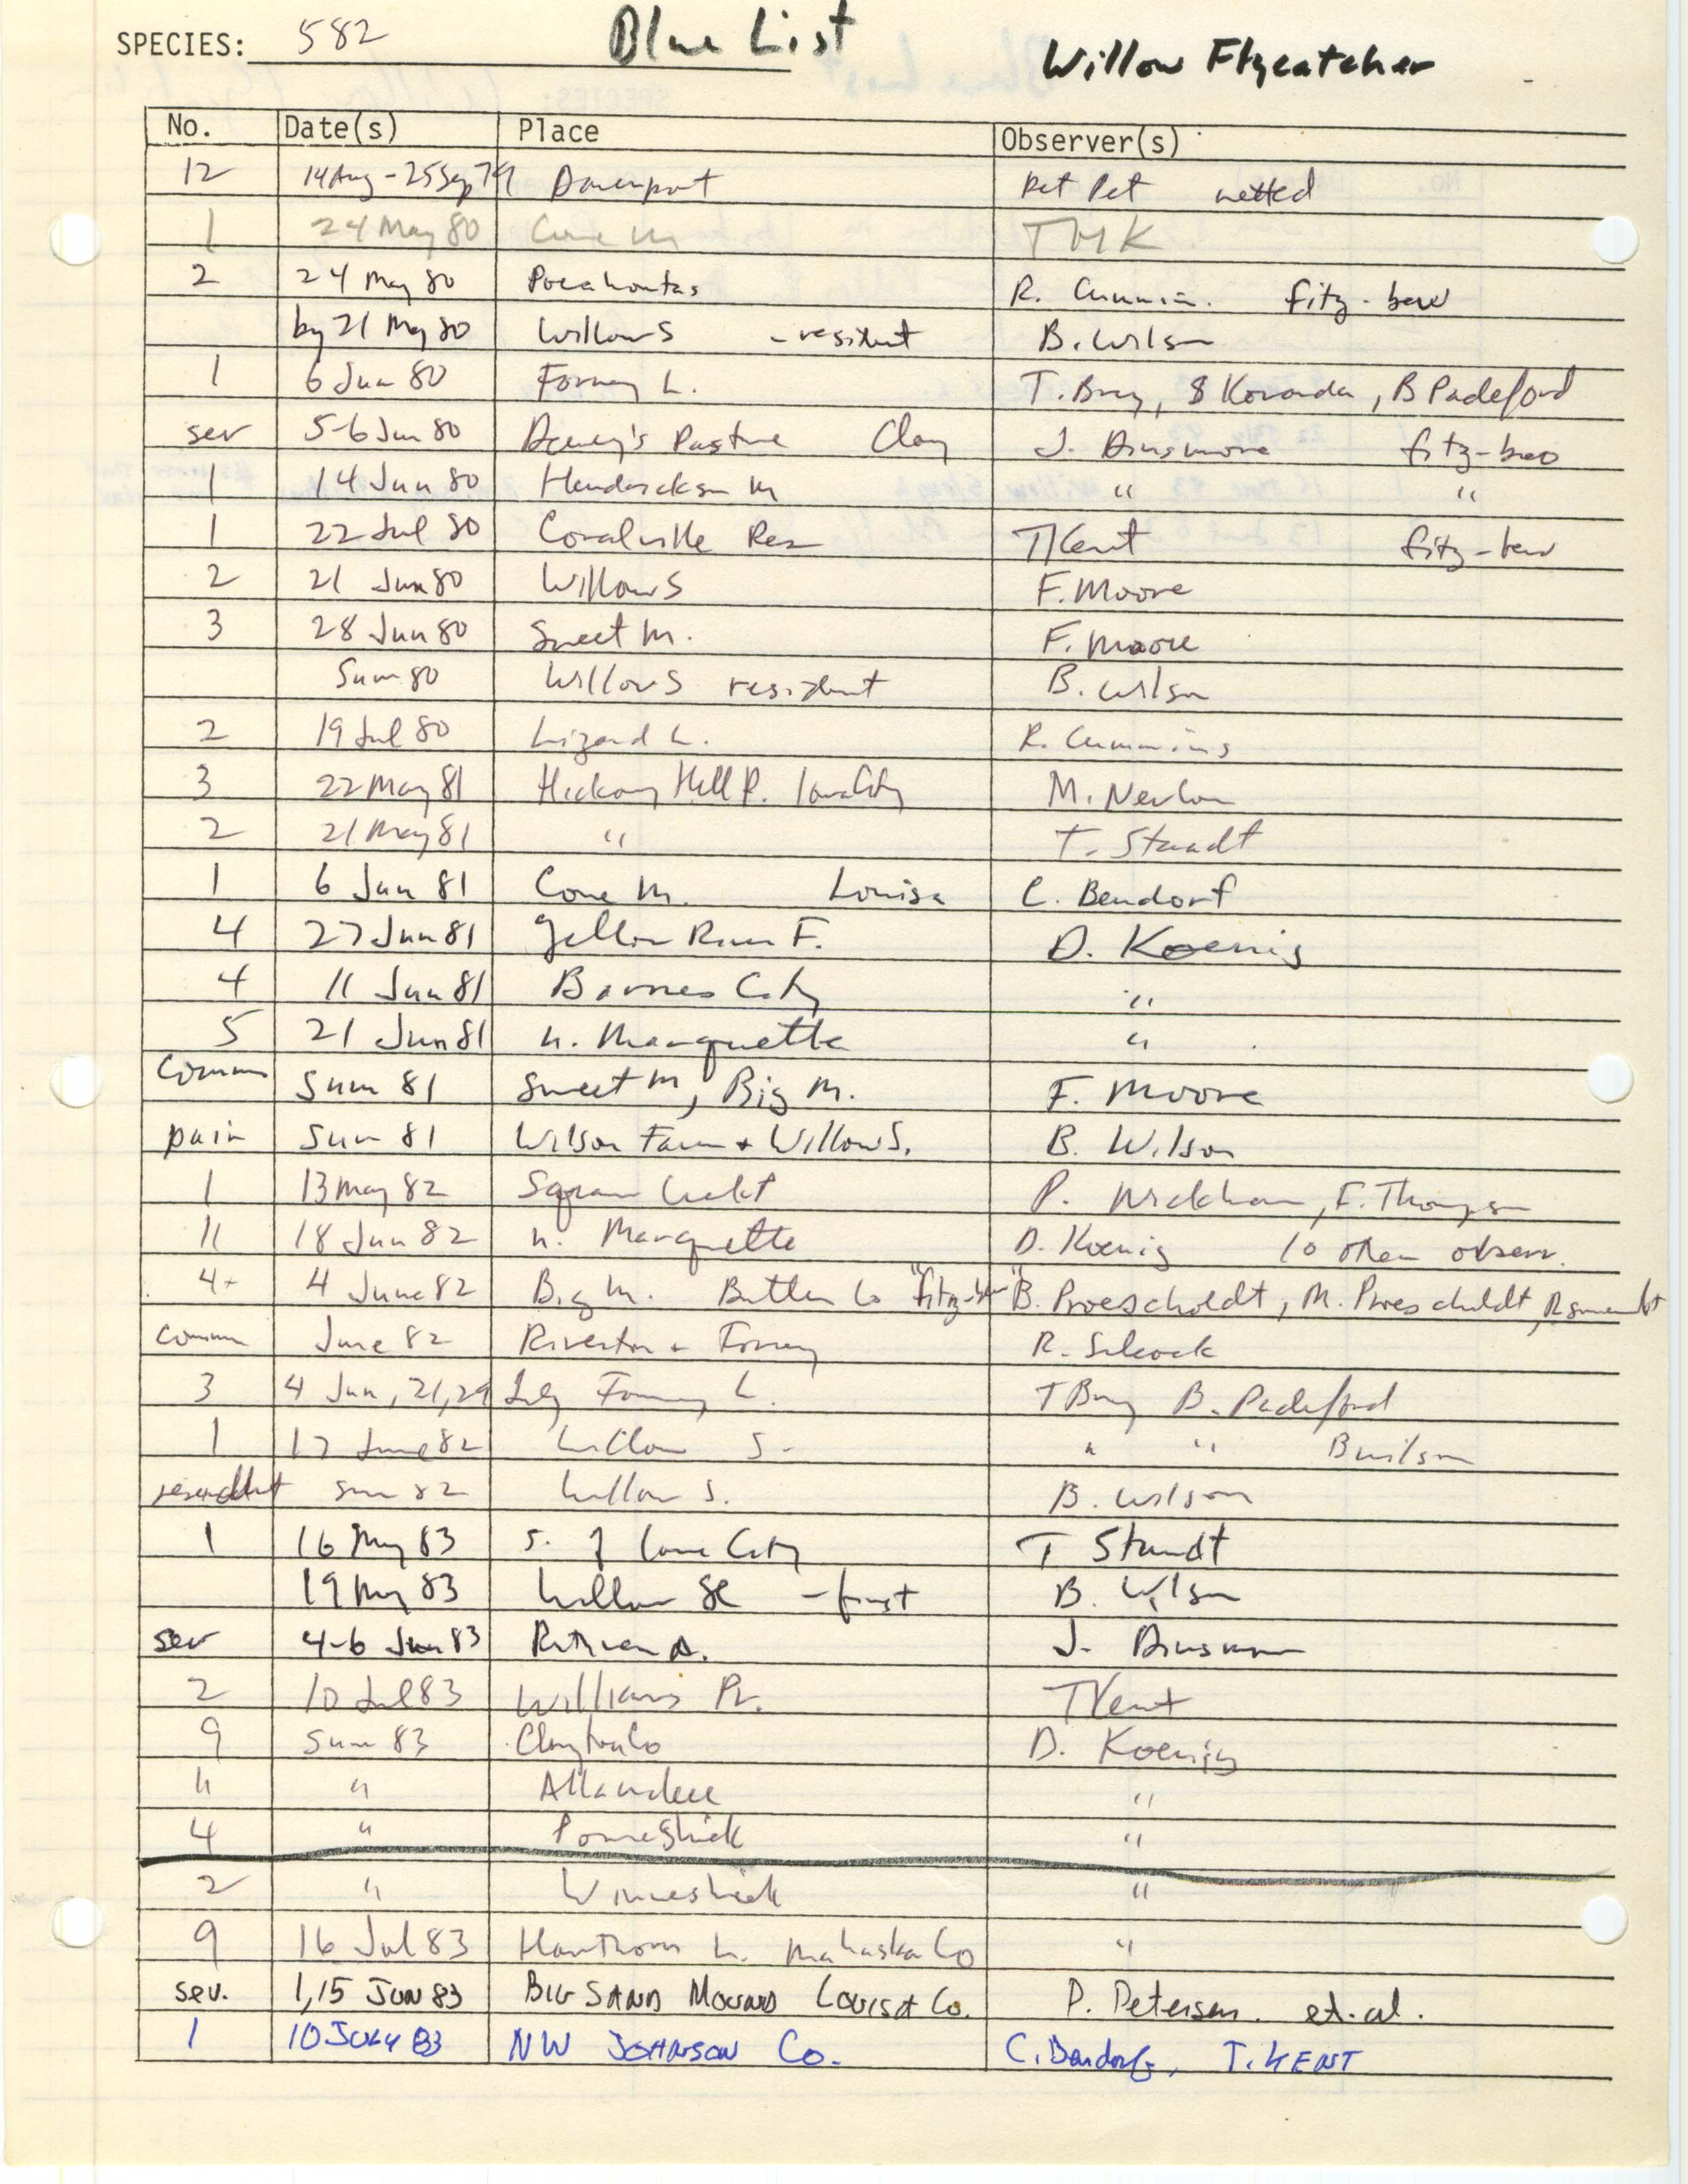 Iowa Ornithologists' Union, field report compiled data, Willow Flycatcher, 1979-1983